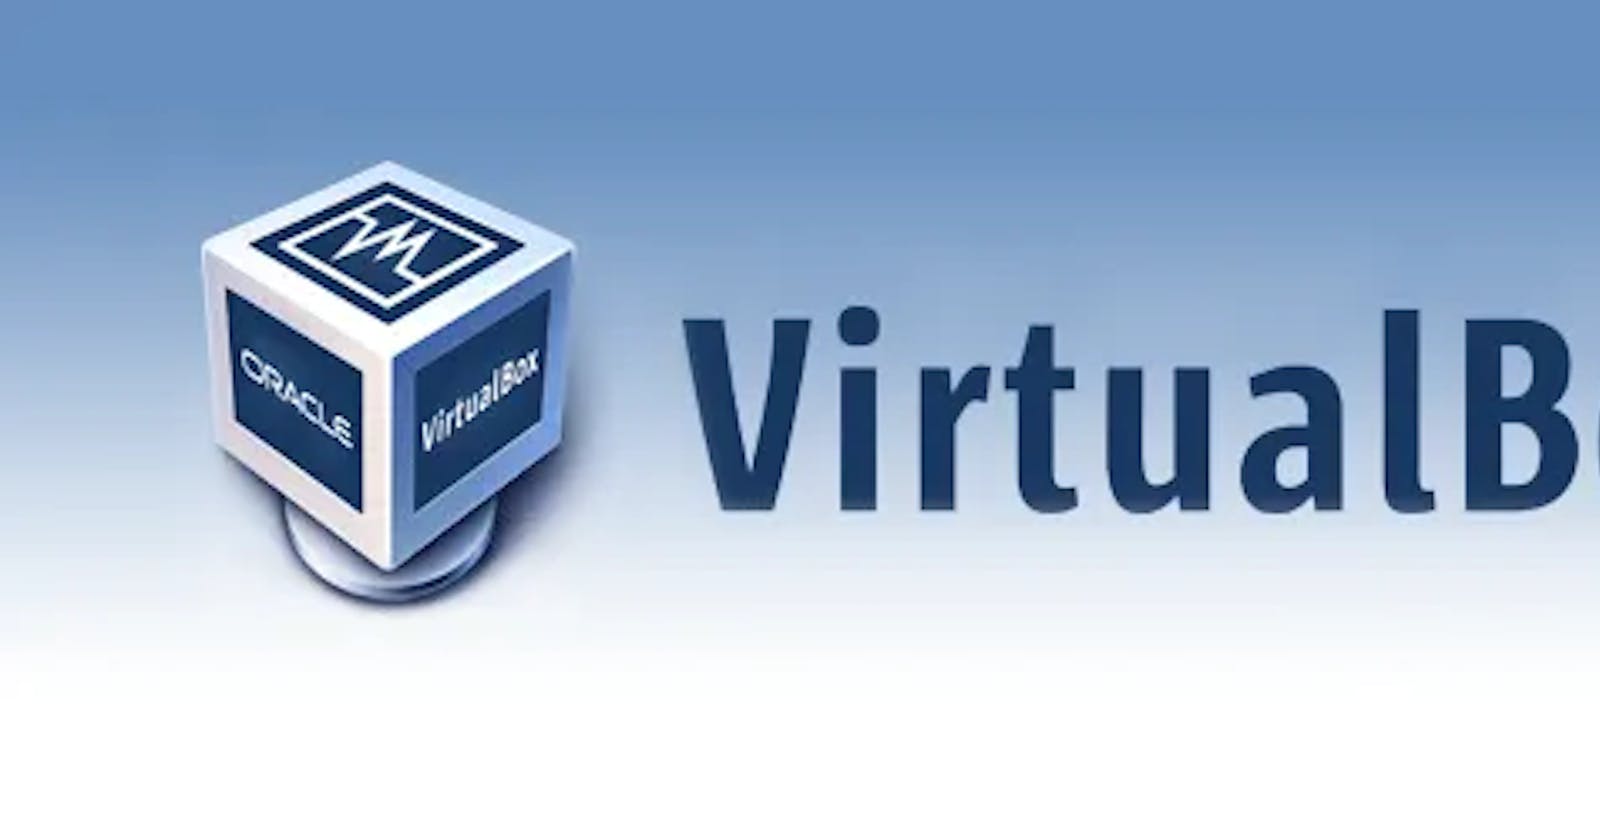 Steps to configure the oracle virtual box for creating ubuntu virtual machine on the local windows system.